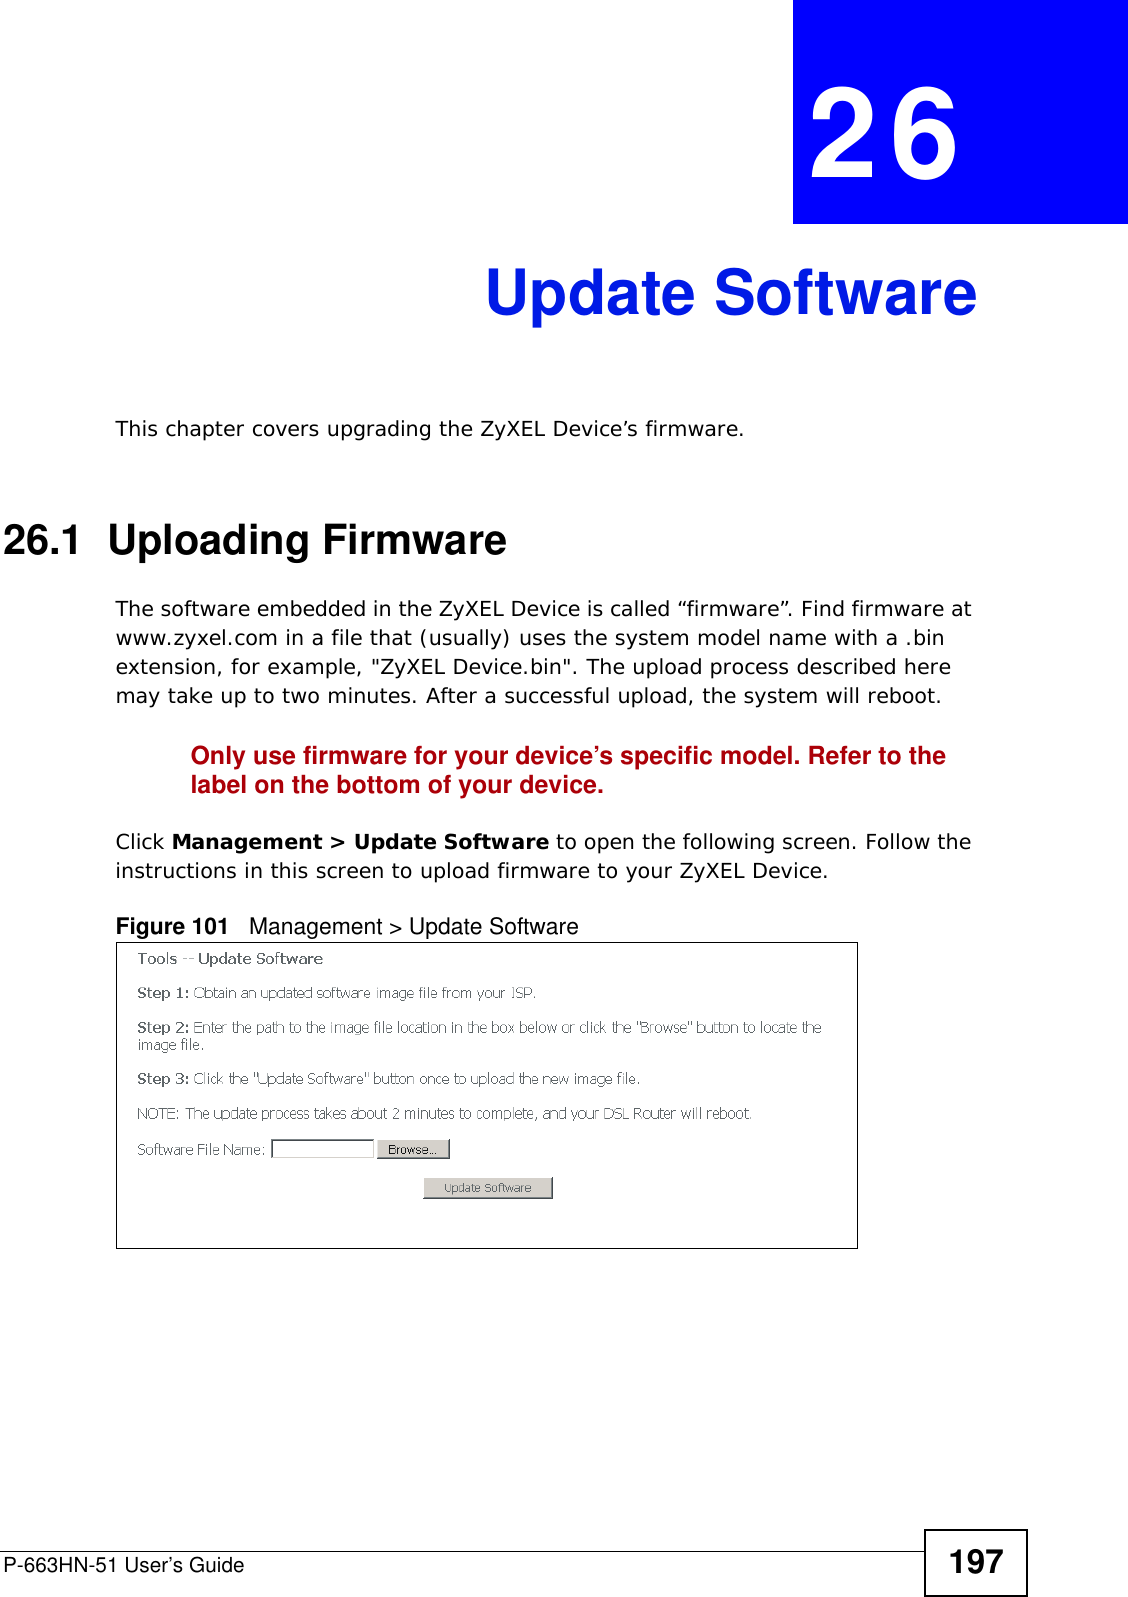 P-663HN-51 User’s Guide 197CHAPTER  26 Update SoftwareThis chapter covers upgrading the ZyXEL Device’s firmware.26.1  Uploading FirmwareThe software embedded in the ZyXEL Device is called “firmware”. Find firmware at www.zyxel.com in a file that (usually) uses the system model name with a .bin extension, for example, &quot;ZyXEL Device.bin&quot;. The upload process described here may take up to two minutes. After a successful upload, the system will reboot. Only use firmware for your device’s specific model. Refer to the label on the bottom of your device.Click Management &gt; Update Software to open the following screen. Follow the instructions in this screen to upload firmware to your ZyXEL Device. Figure 101   Management &gt; Update Software